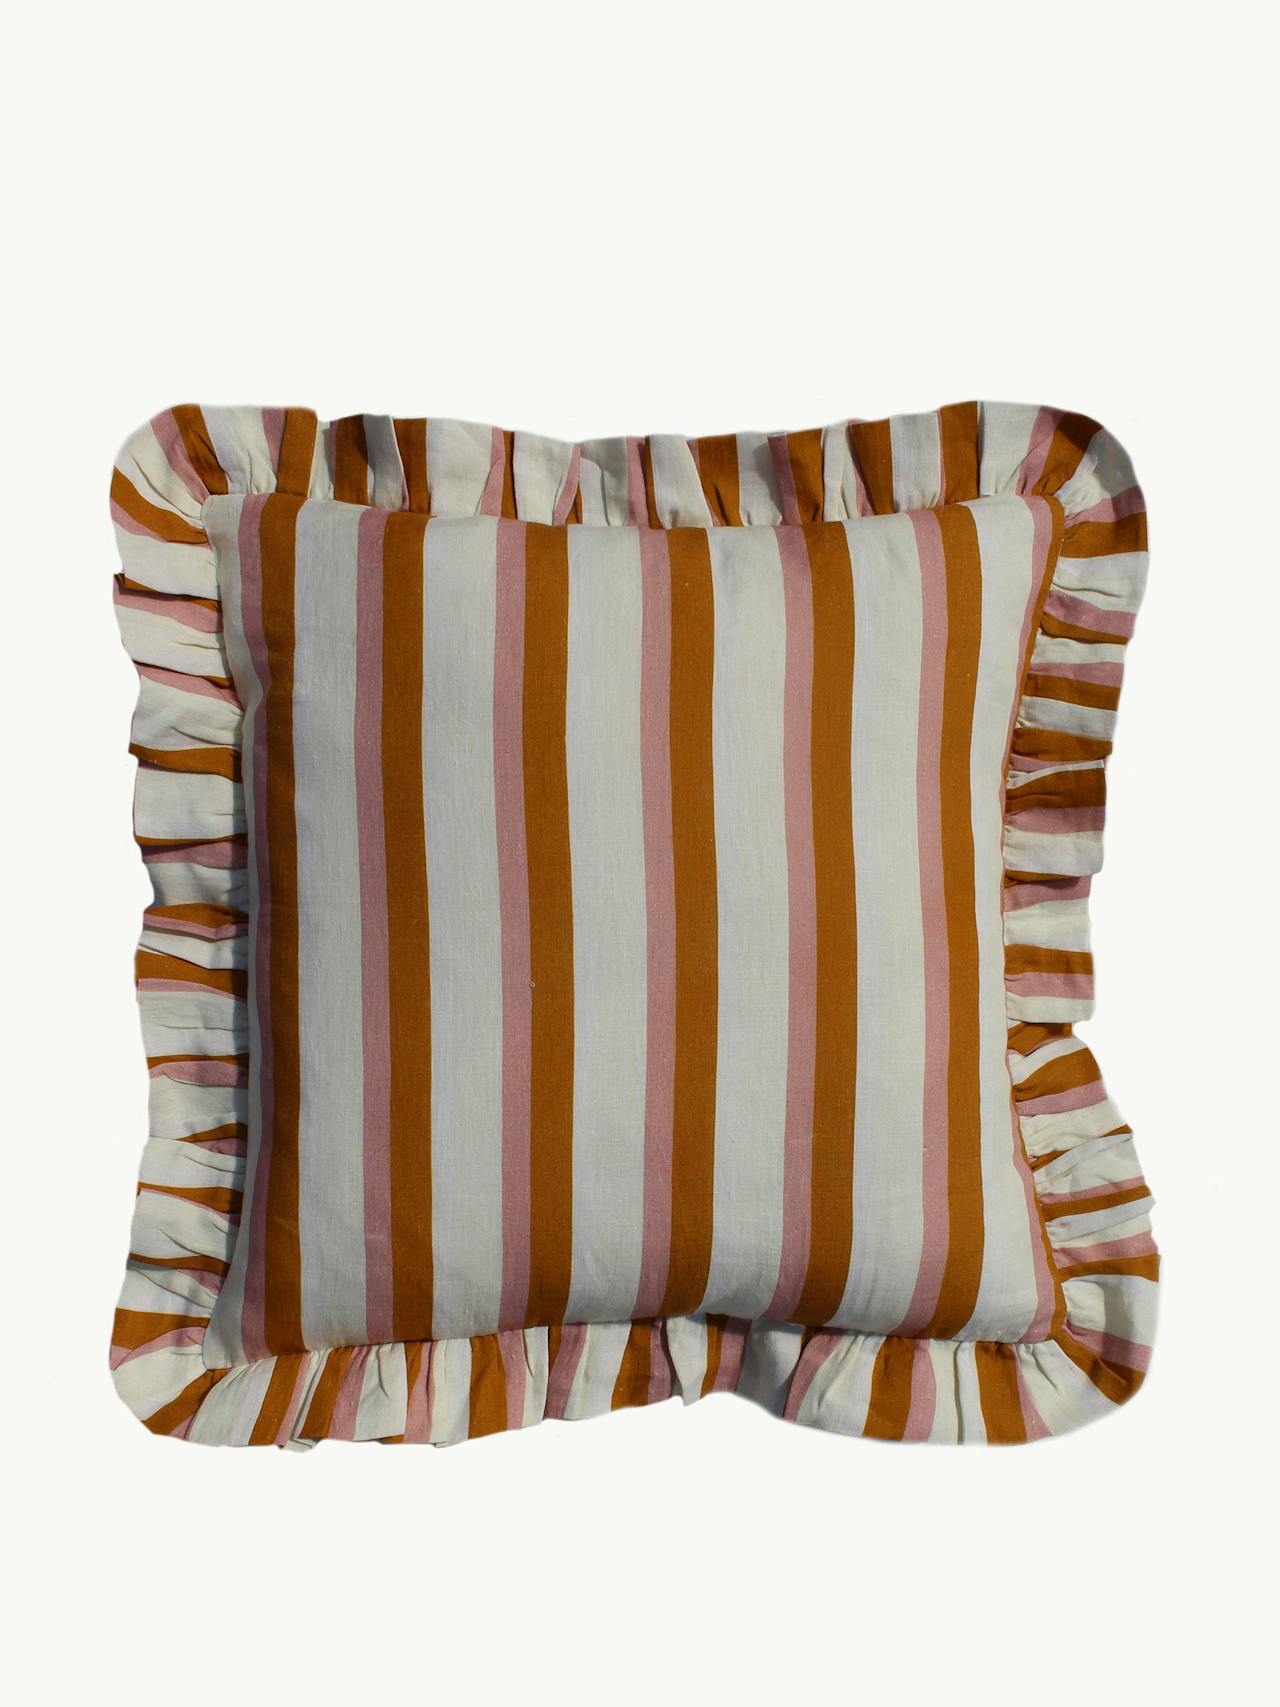 Ochre and blush large stripe cushion cover